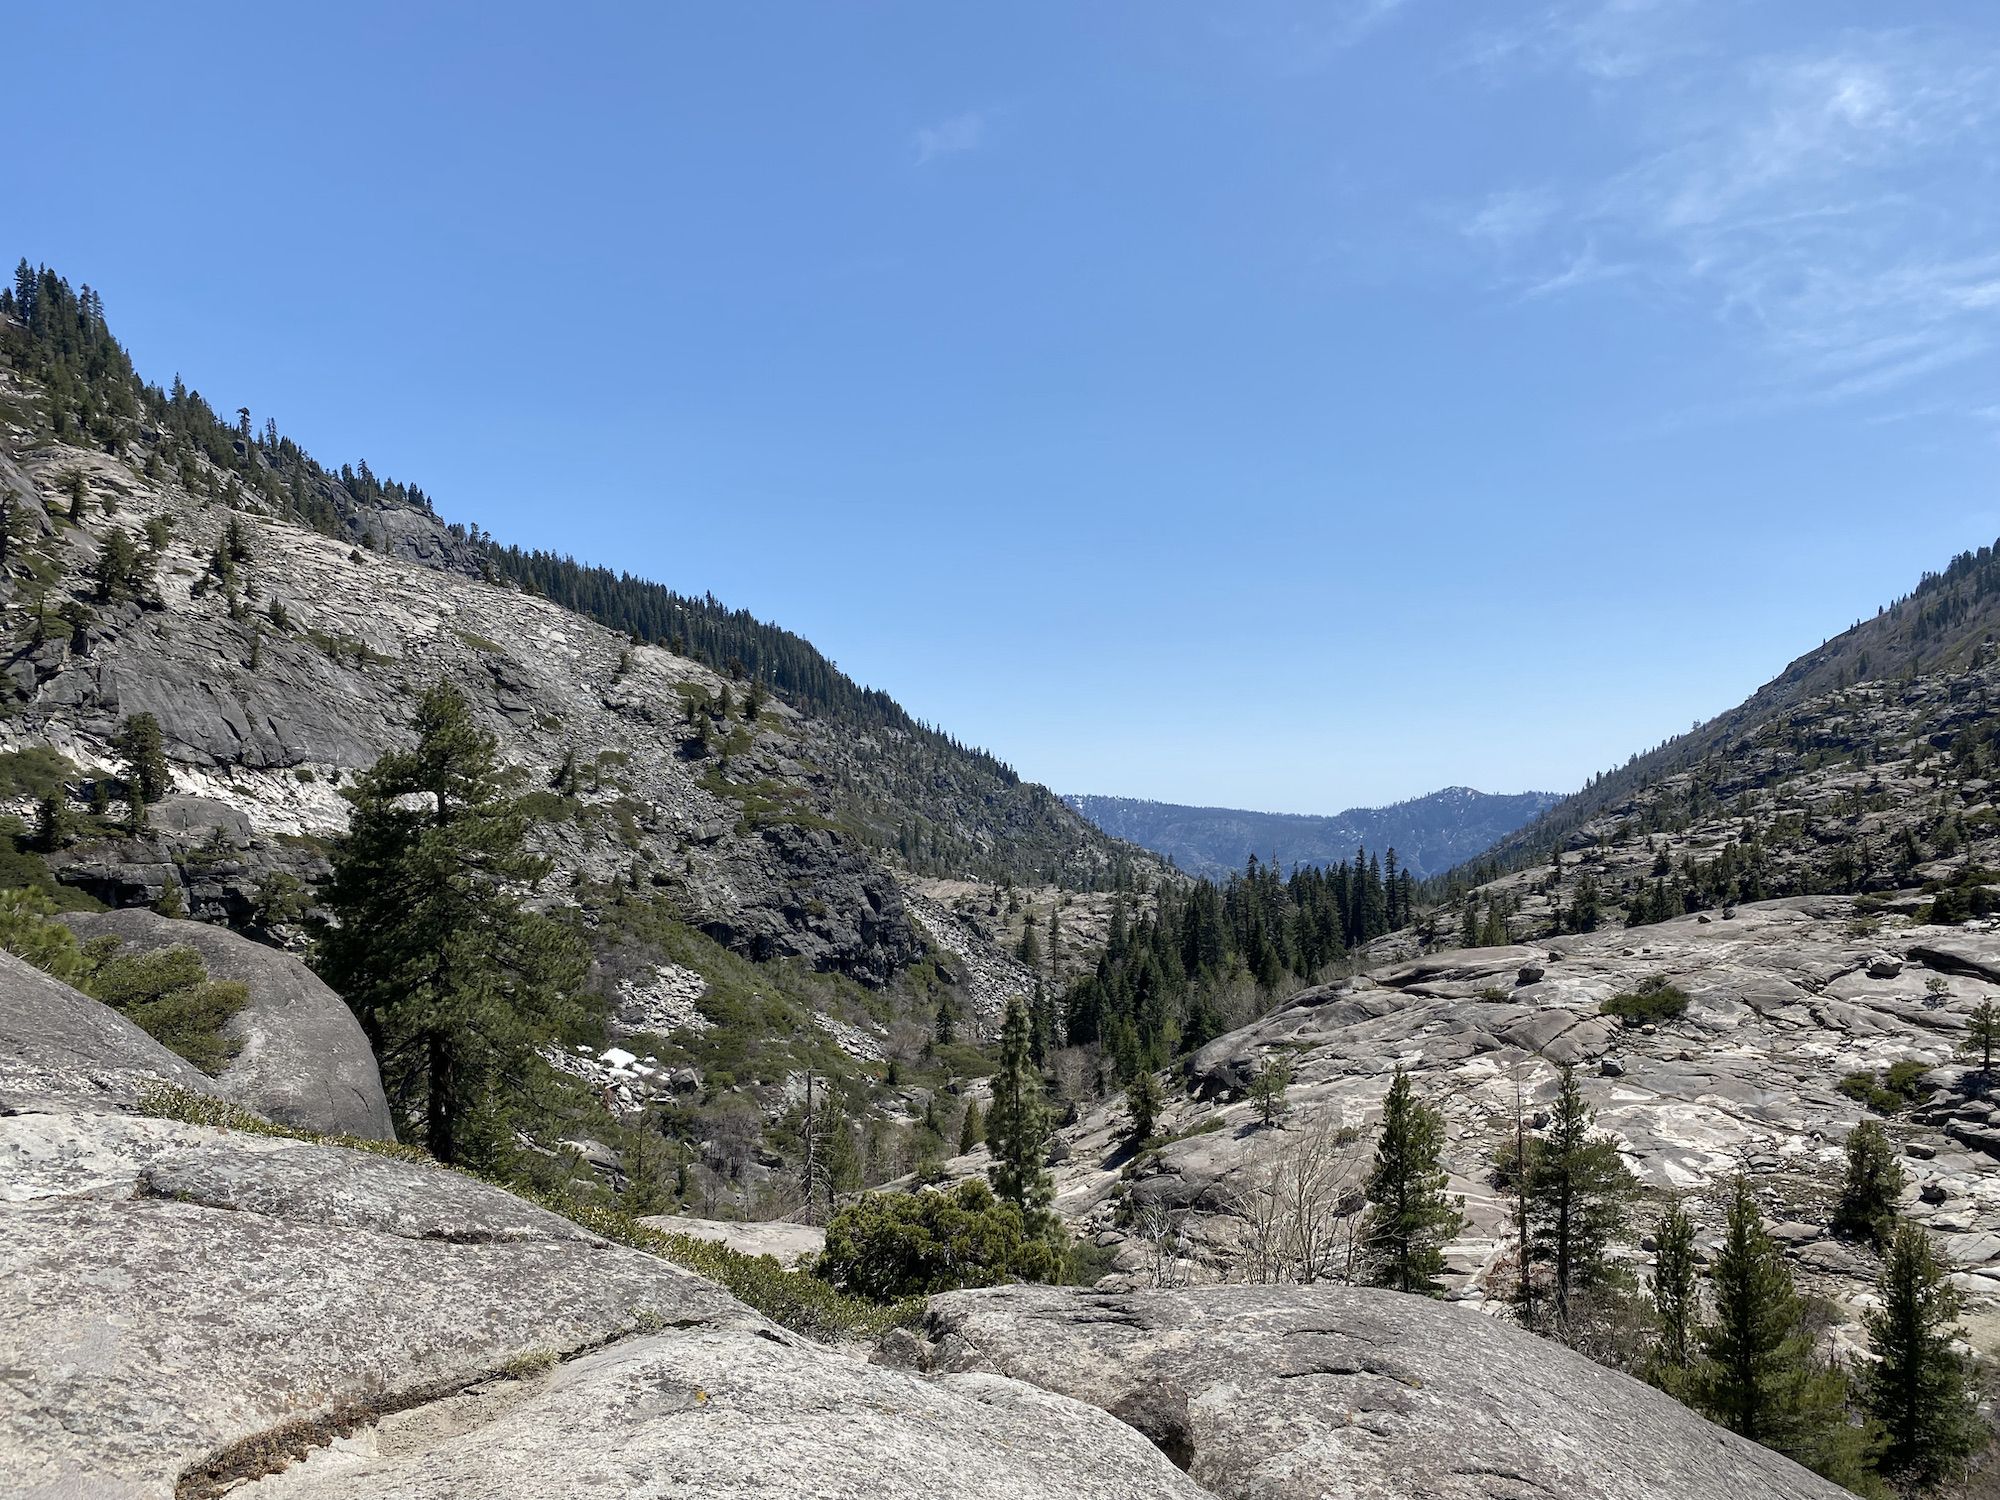 A granite valley with pine trees